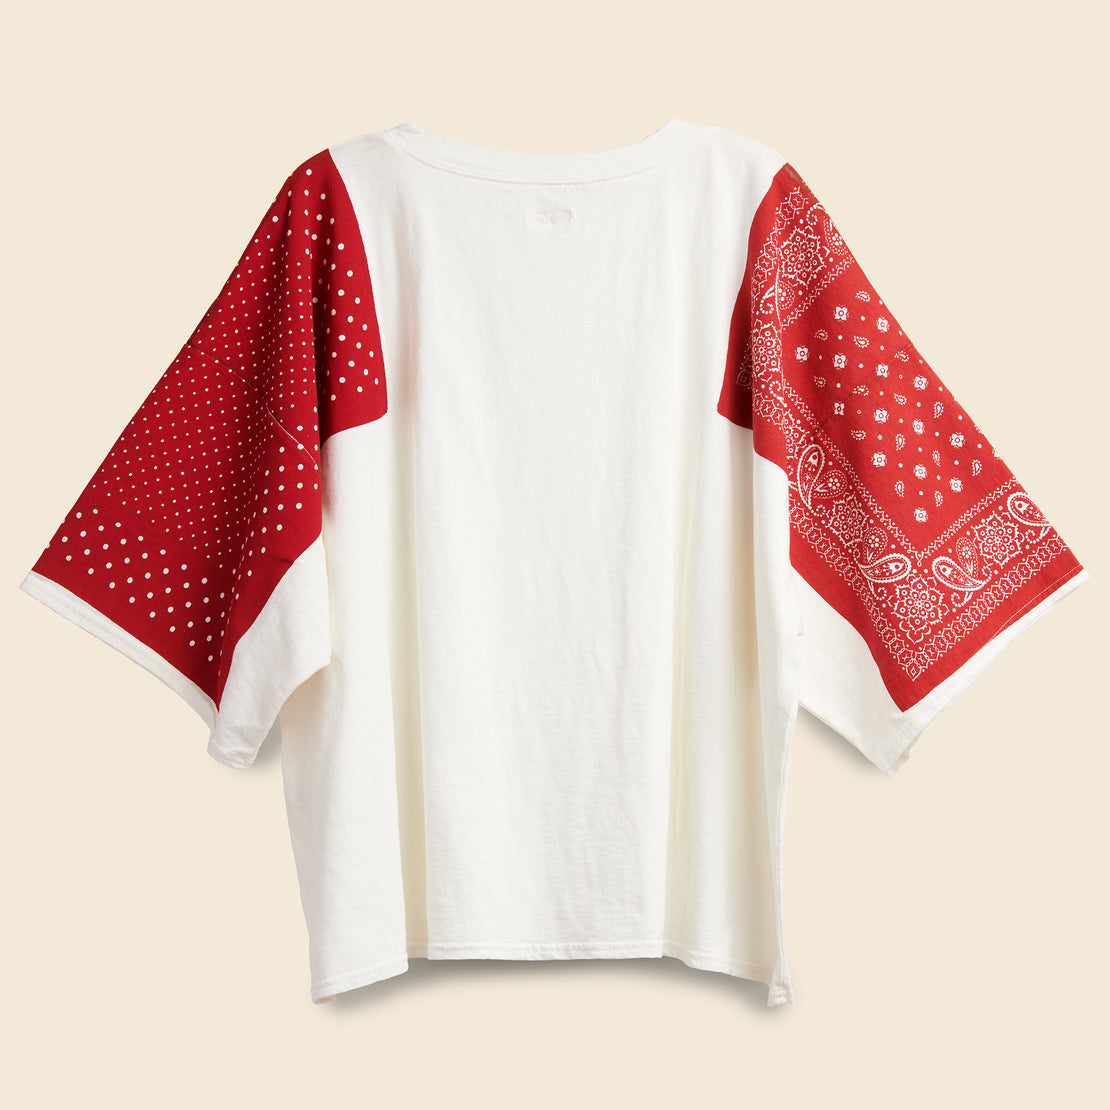 Jersey Bandana Huge Tee - Red - Kapital - STAG Provisions - W - Tops - S/S Tee